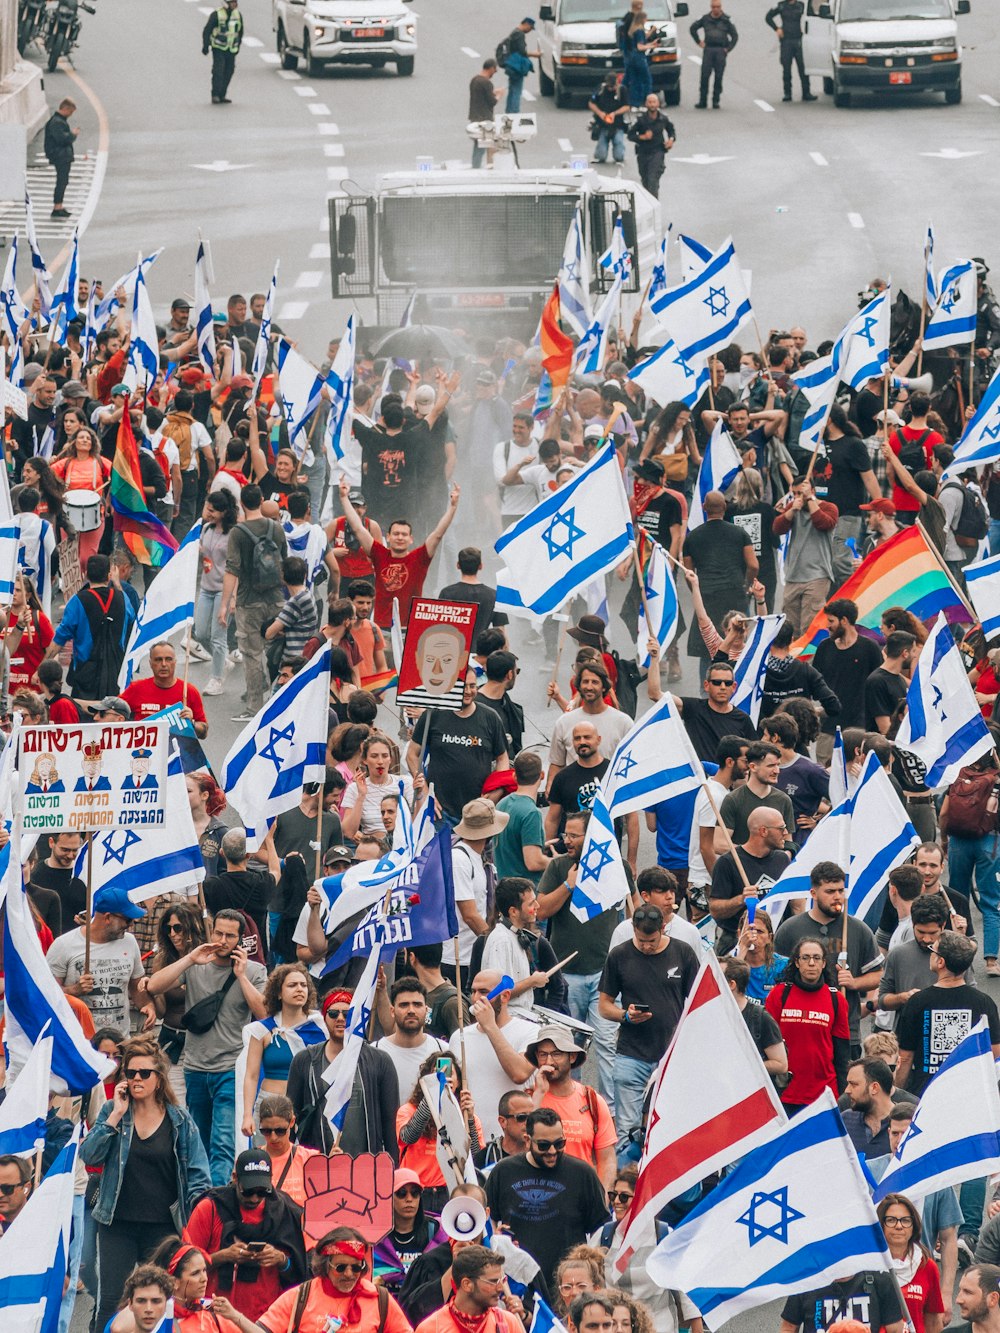 a large group of people holding israeli and israeli flags